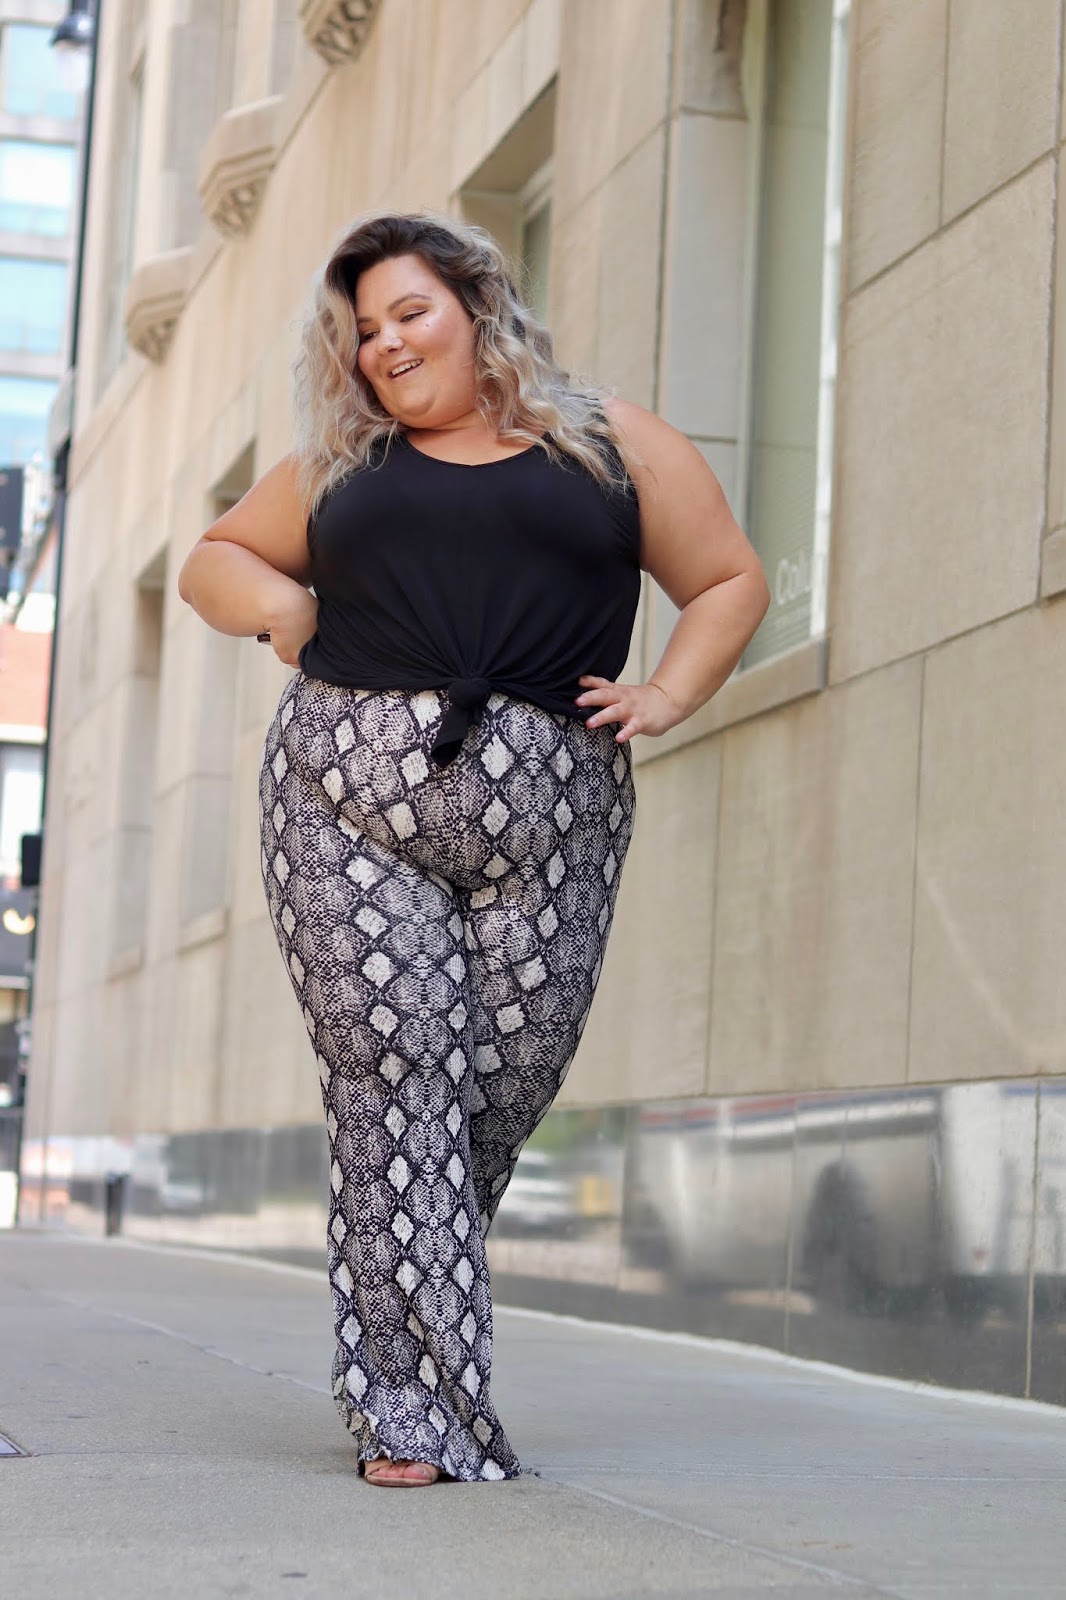 Chicago Plus Size Petite Fashion Blogger Natalie in the City reviews Chic Soul's snake skin bell bottoms.